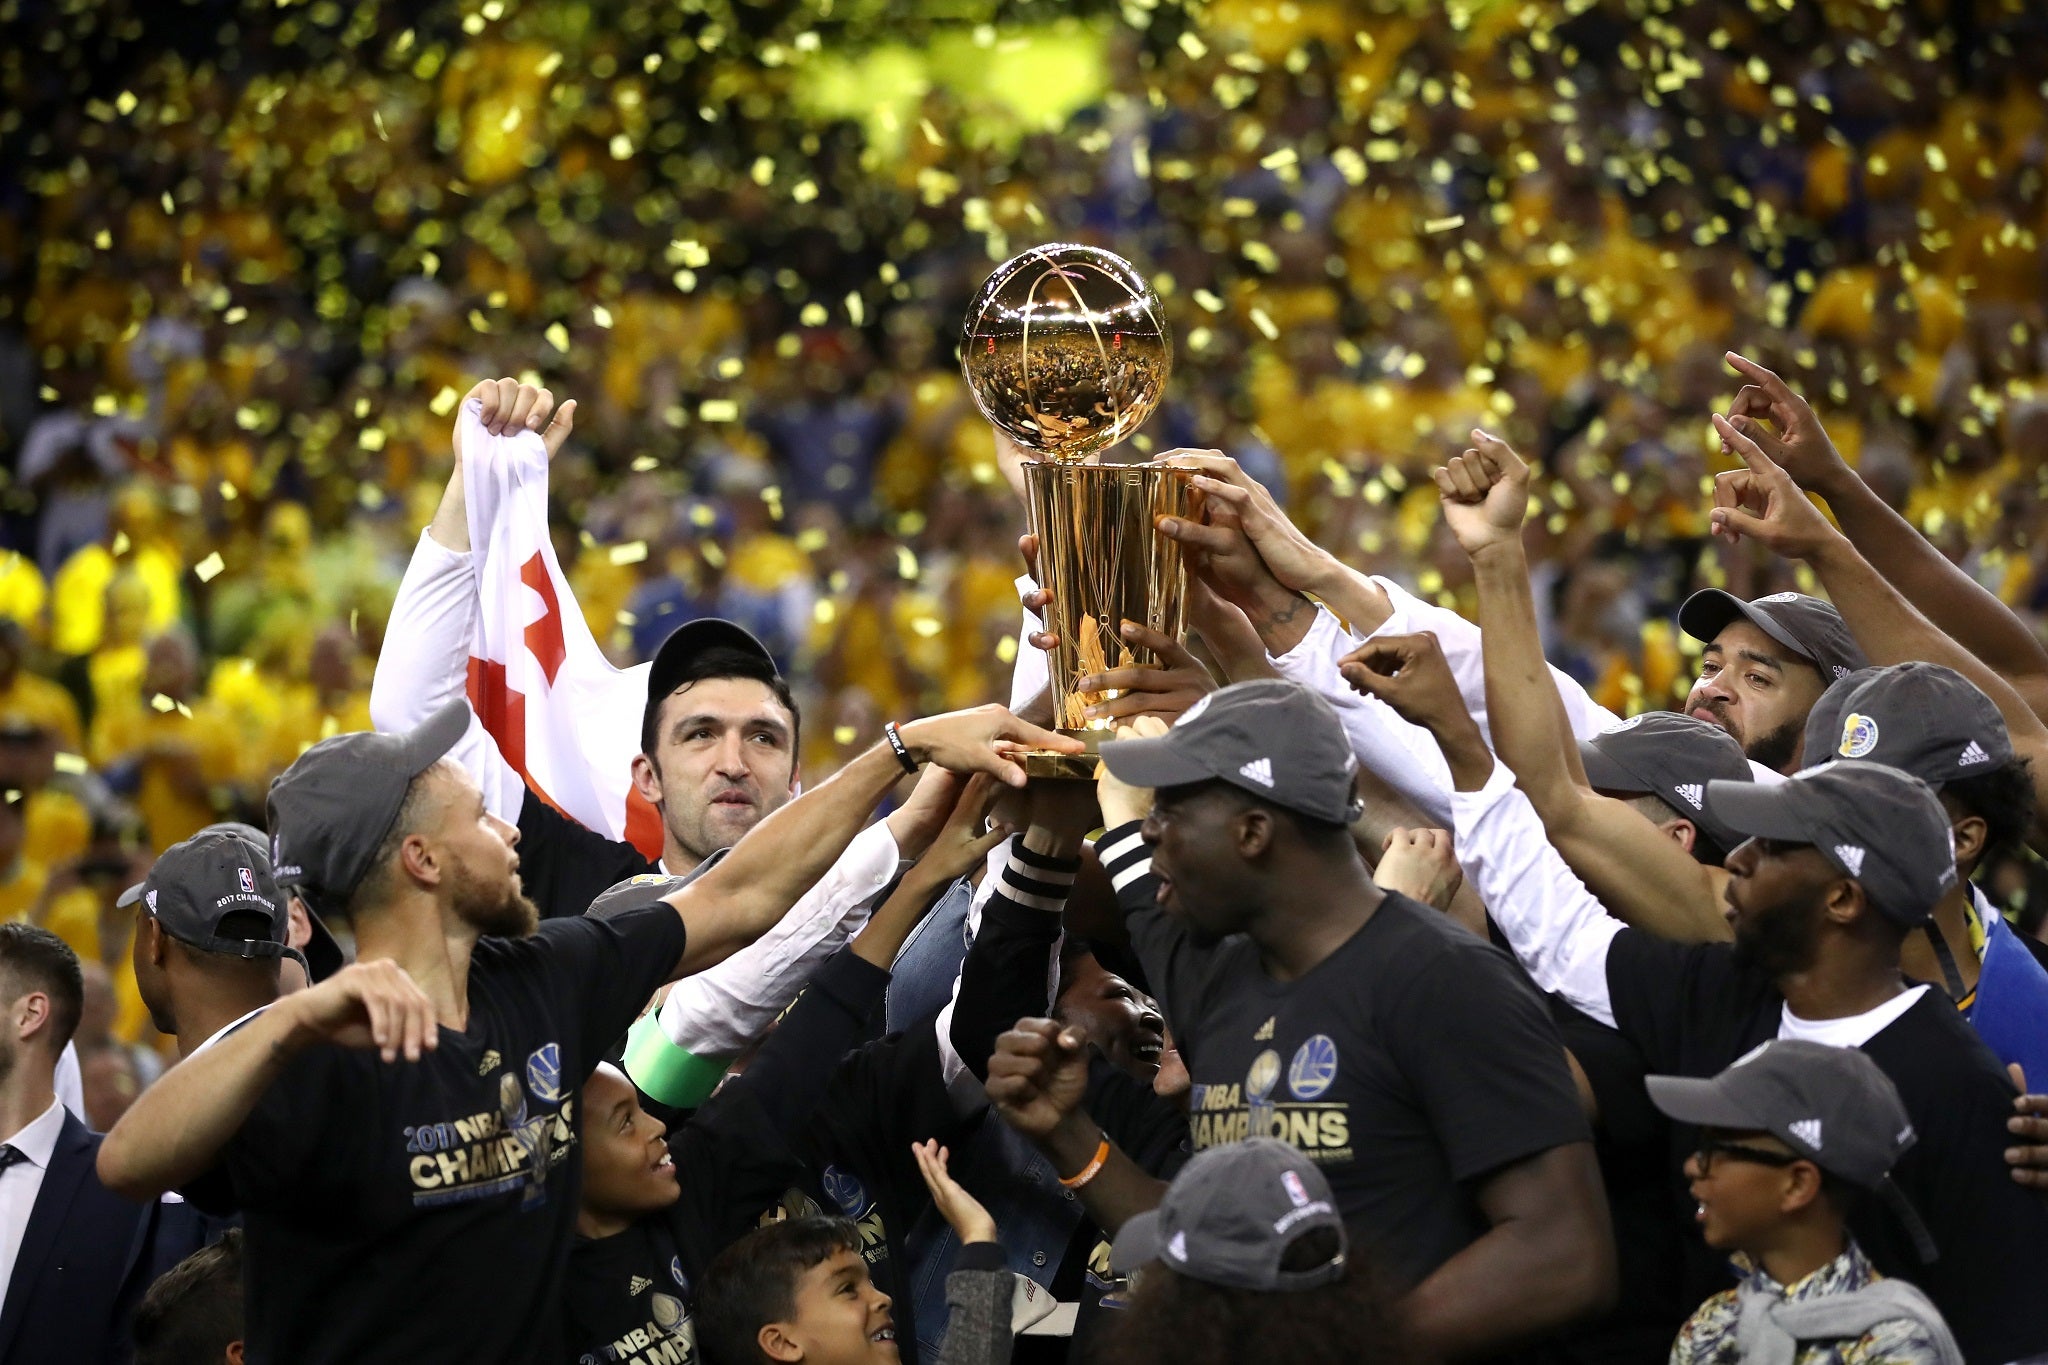 The Golden State Warriors celebrate winning the NBA Finals after beating the Cleveland Cavaliers 4-1